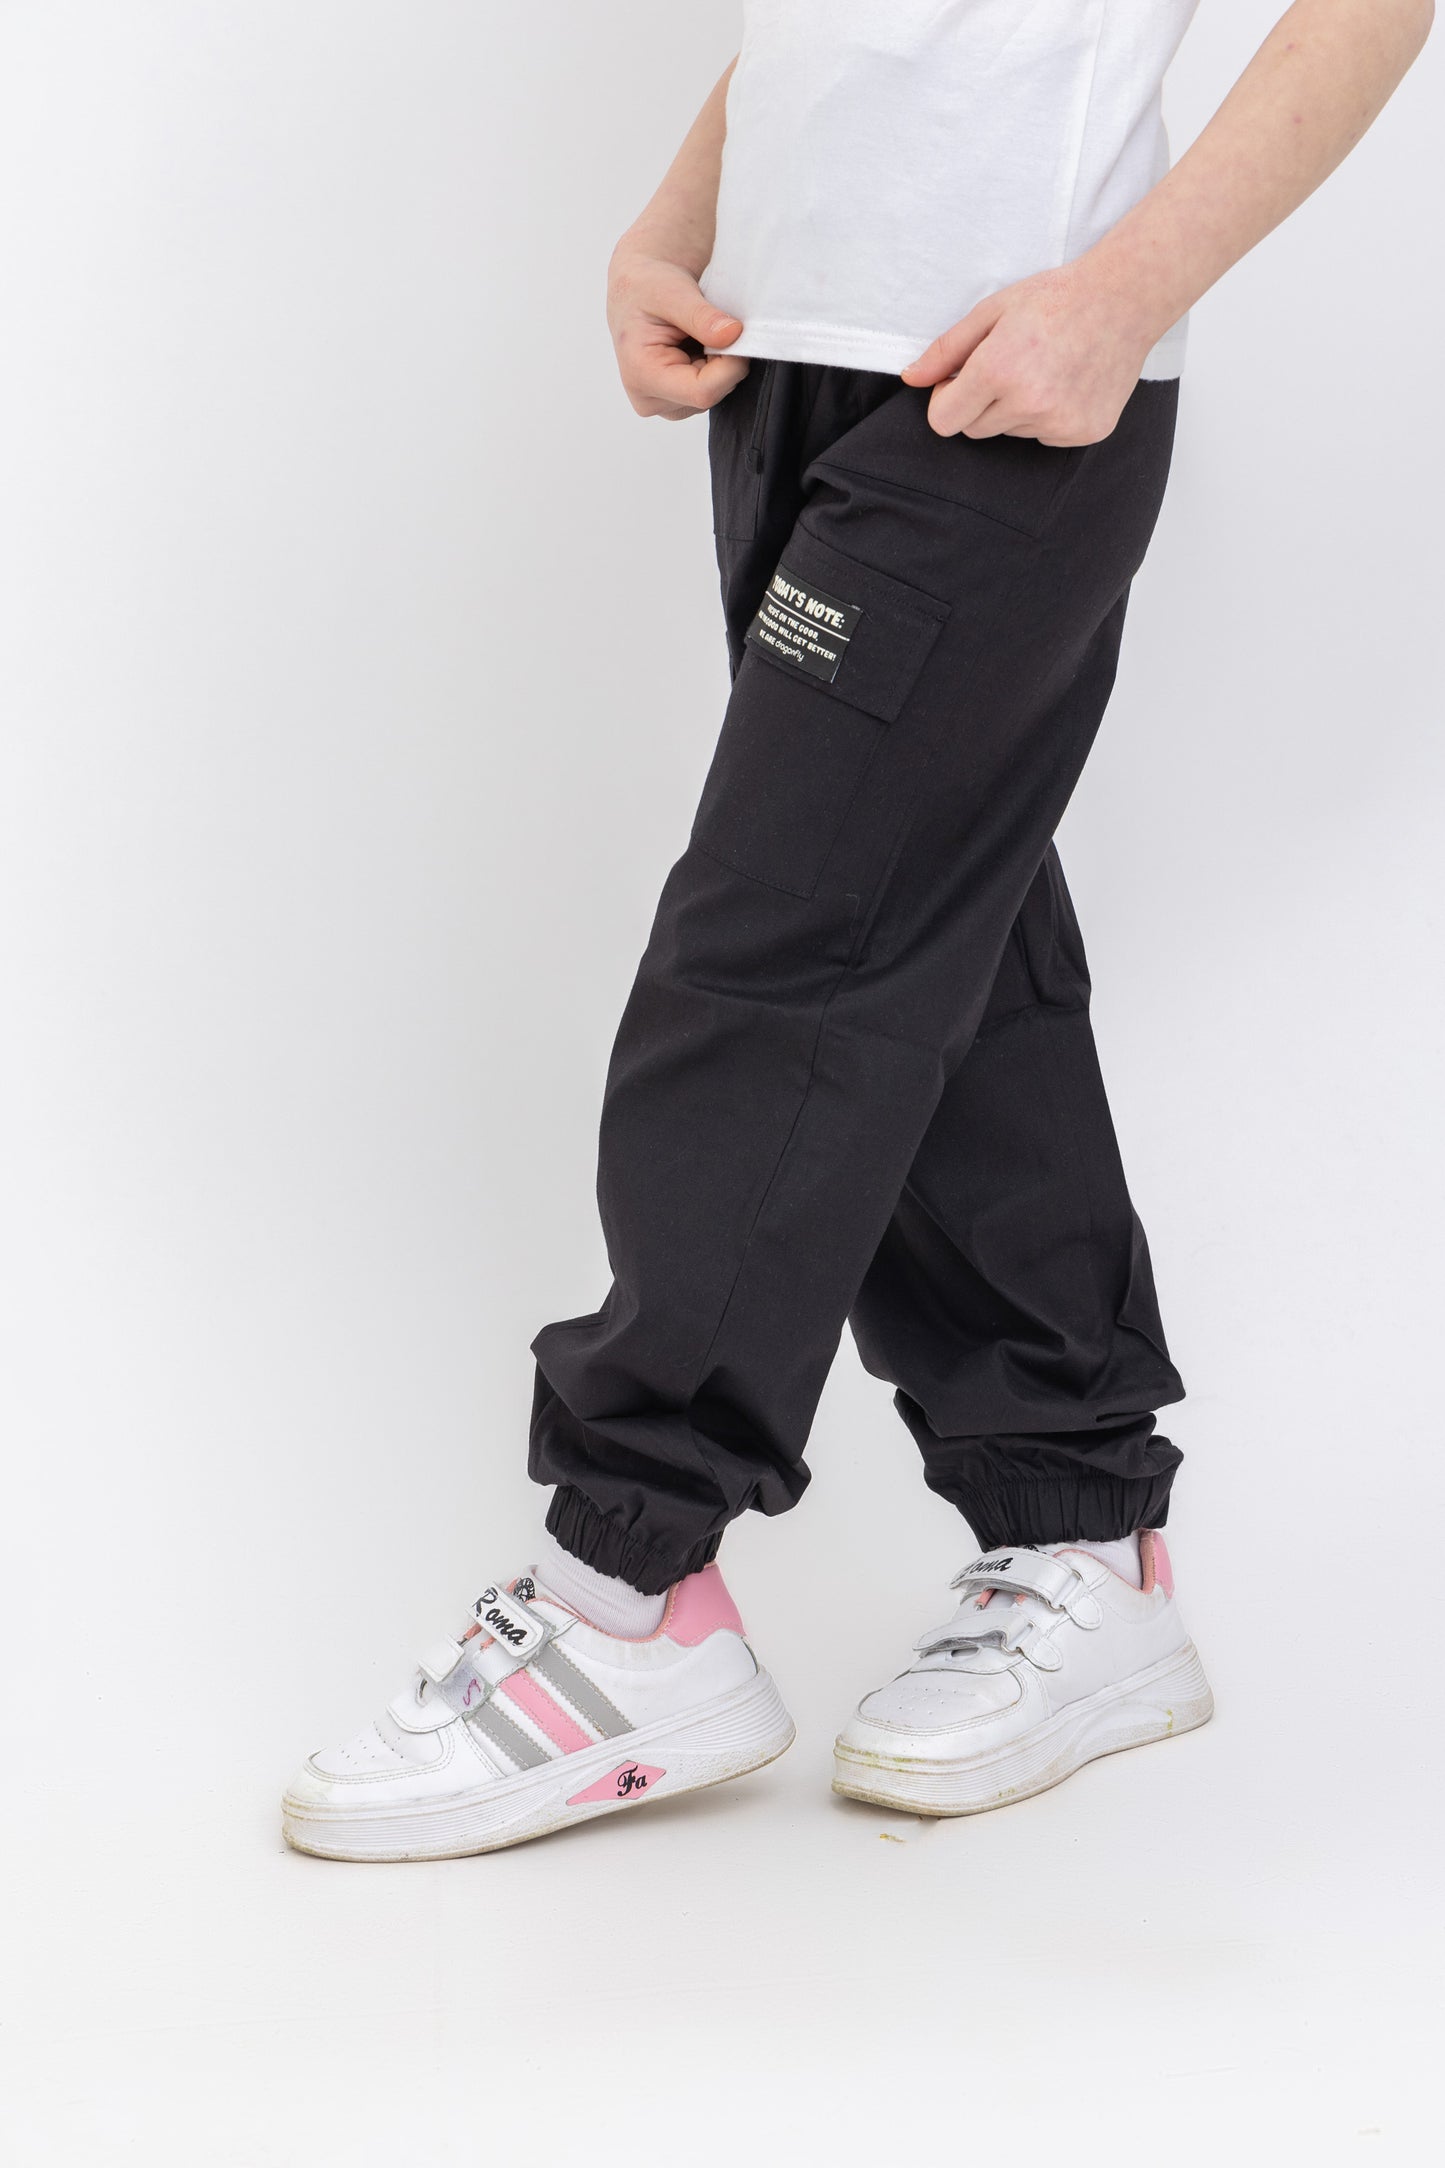 Black Cargo Pants with a note